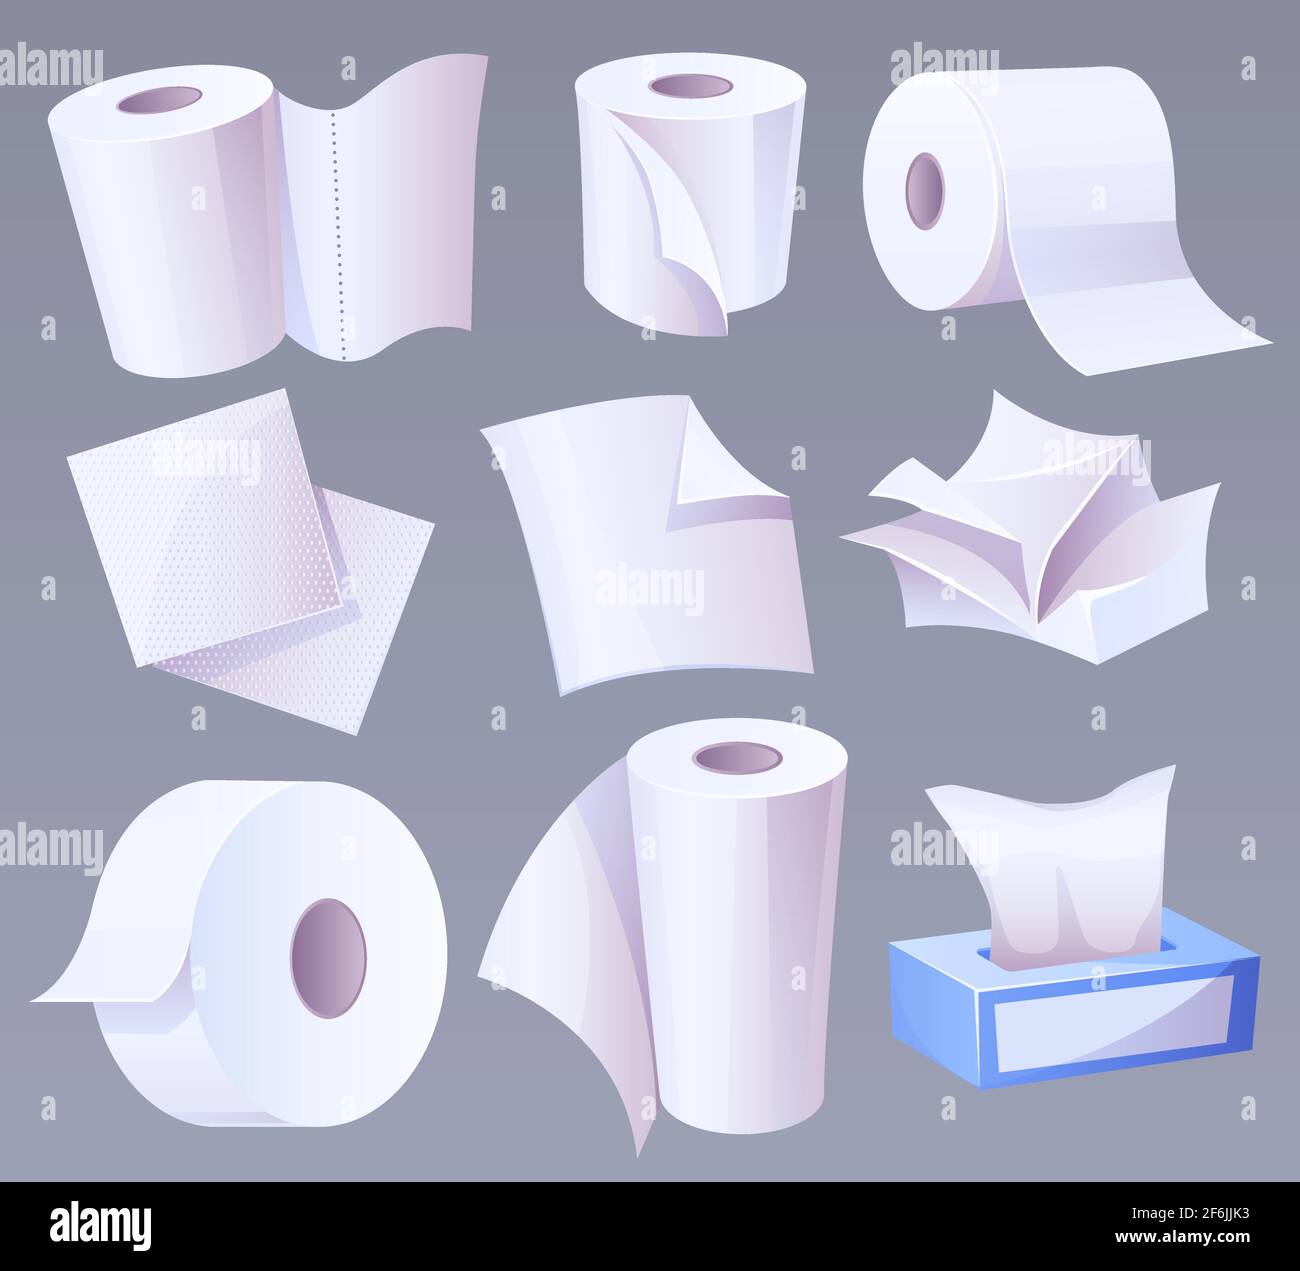 Cellulose production toilet paper, towel with perforation, napkins in carton box, crumpled page and rolls. Hygiene or office accessories isolated on grey background, Cartoon vector illustration, set Stock Vector